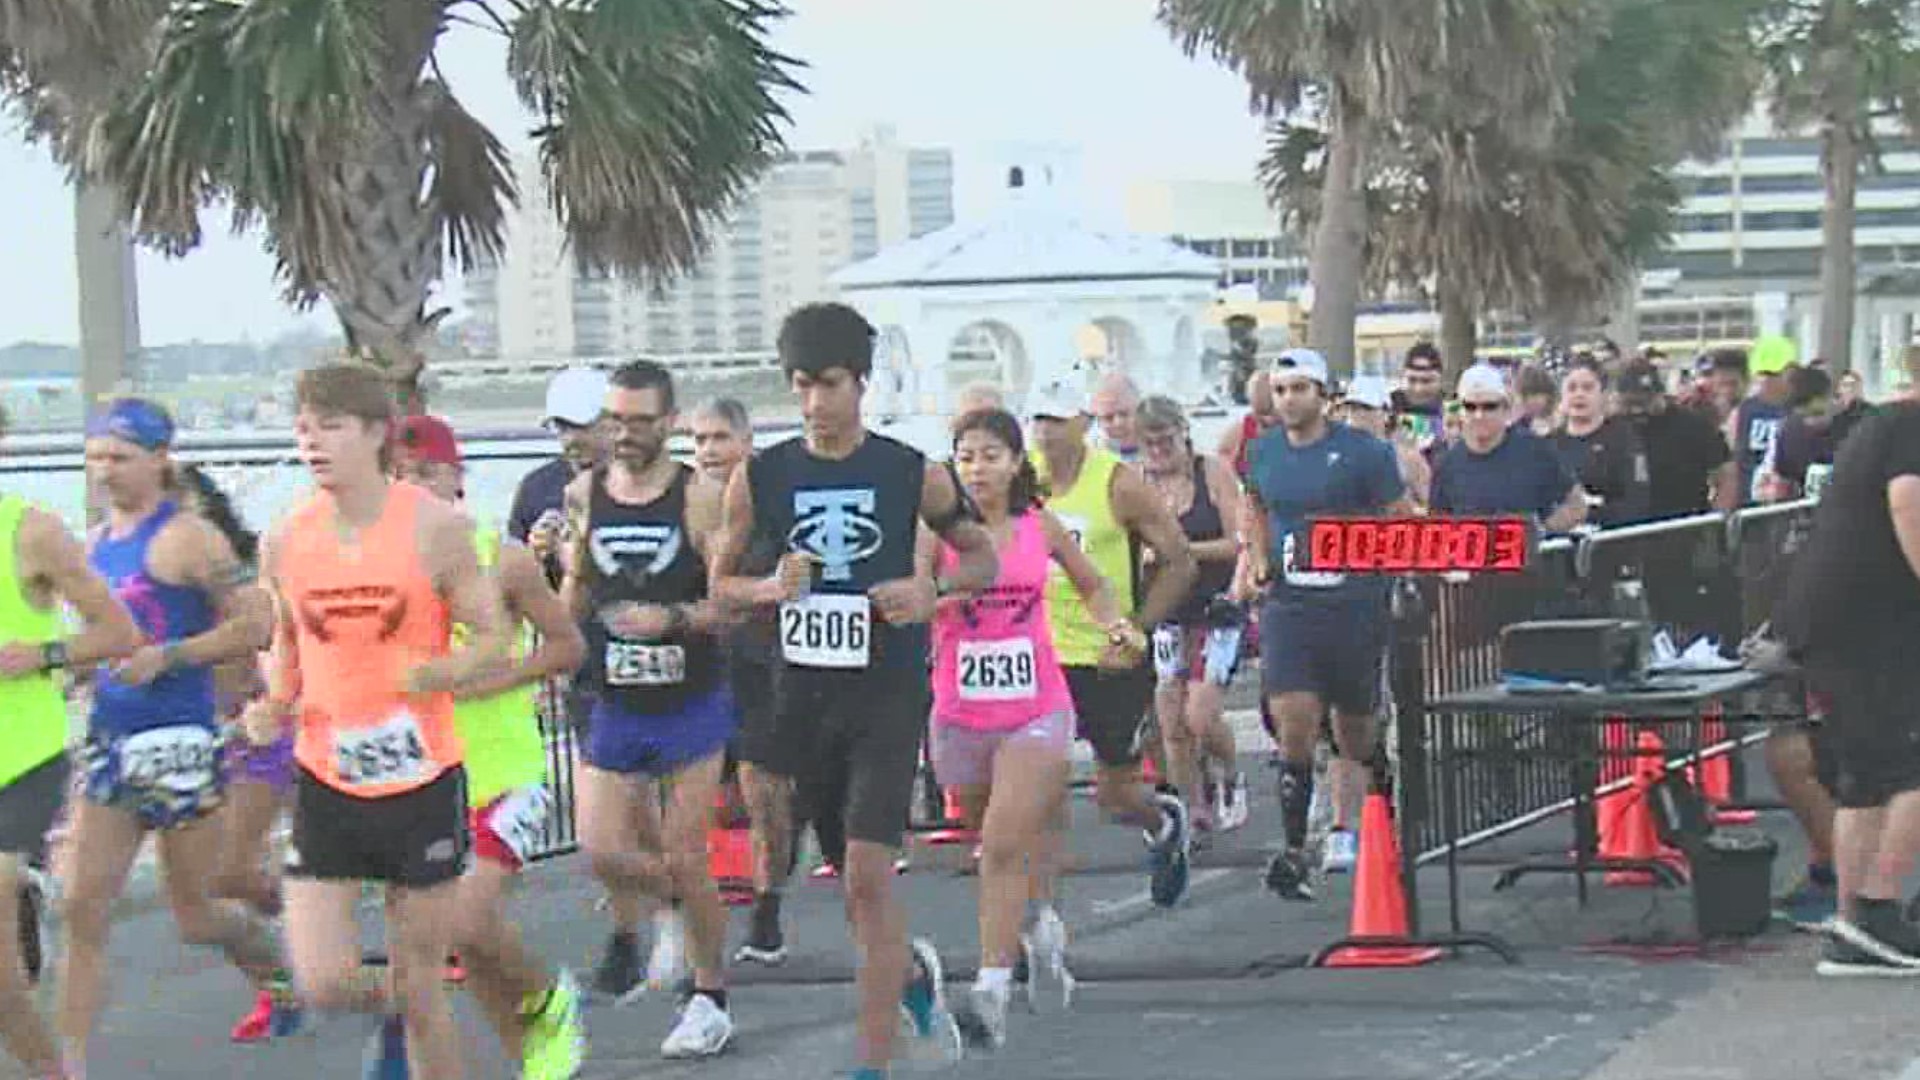 Black Eyed Pea 5K and 10K held at Water's Edge Park